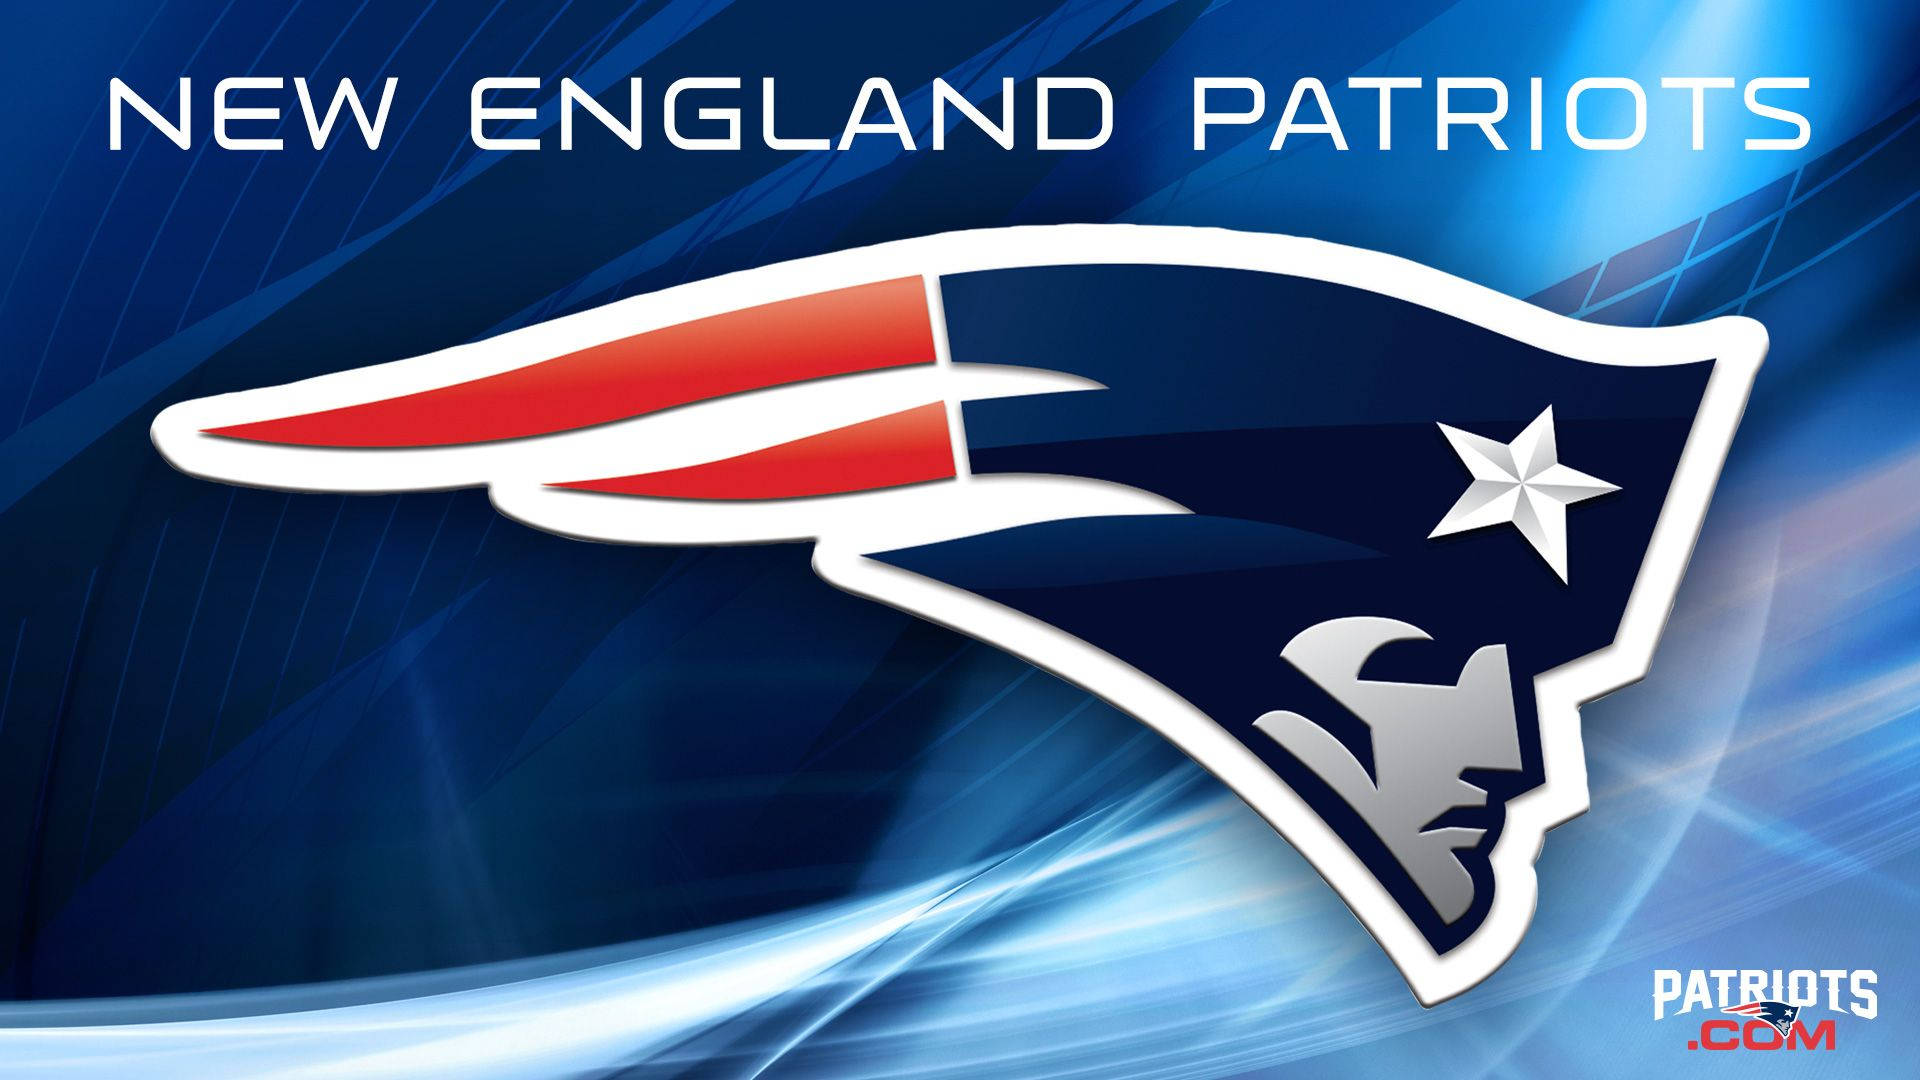 New England Patriots Glowing Background